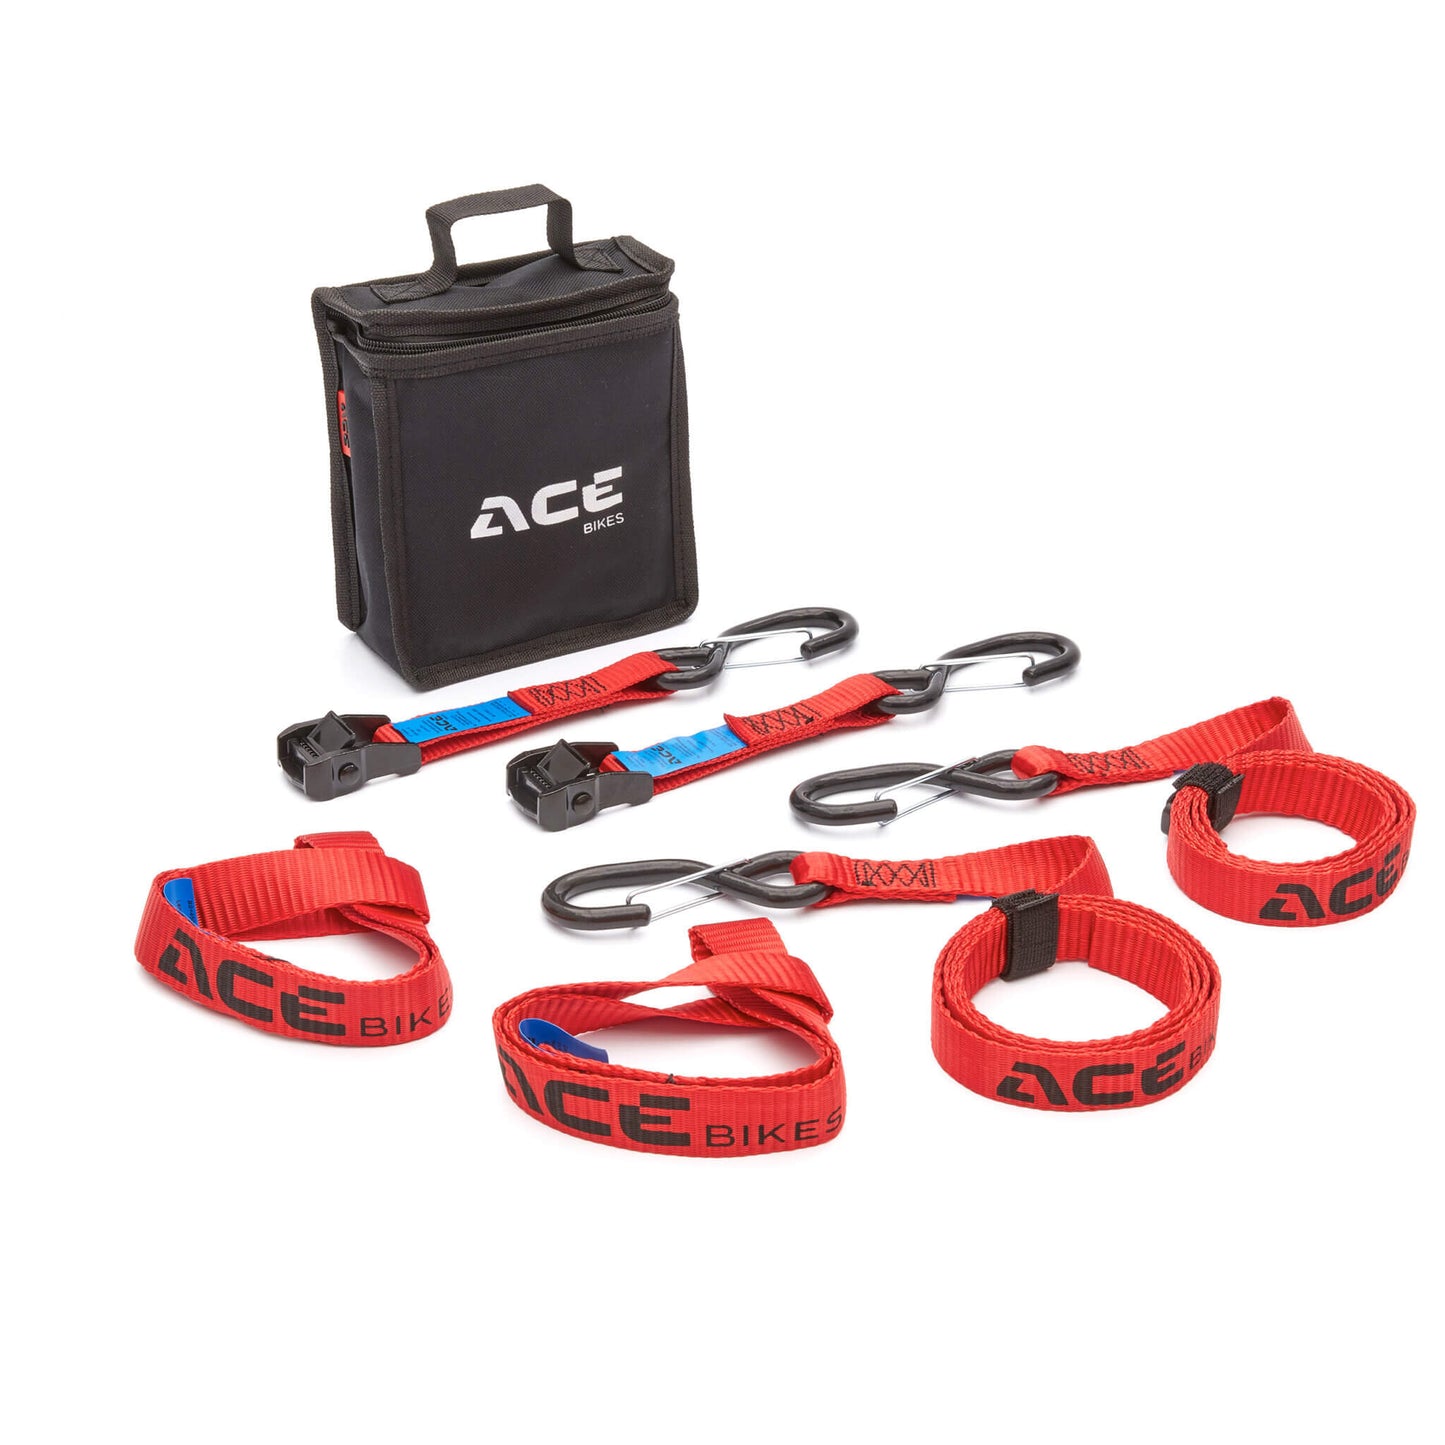 Acebikes Cam Buckle Pro 2-pack